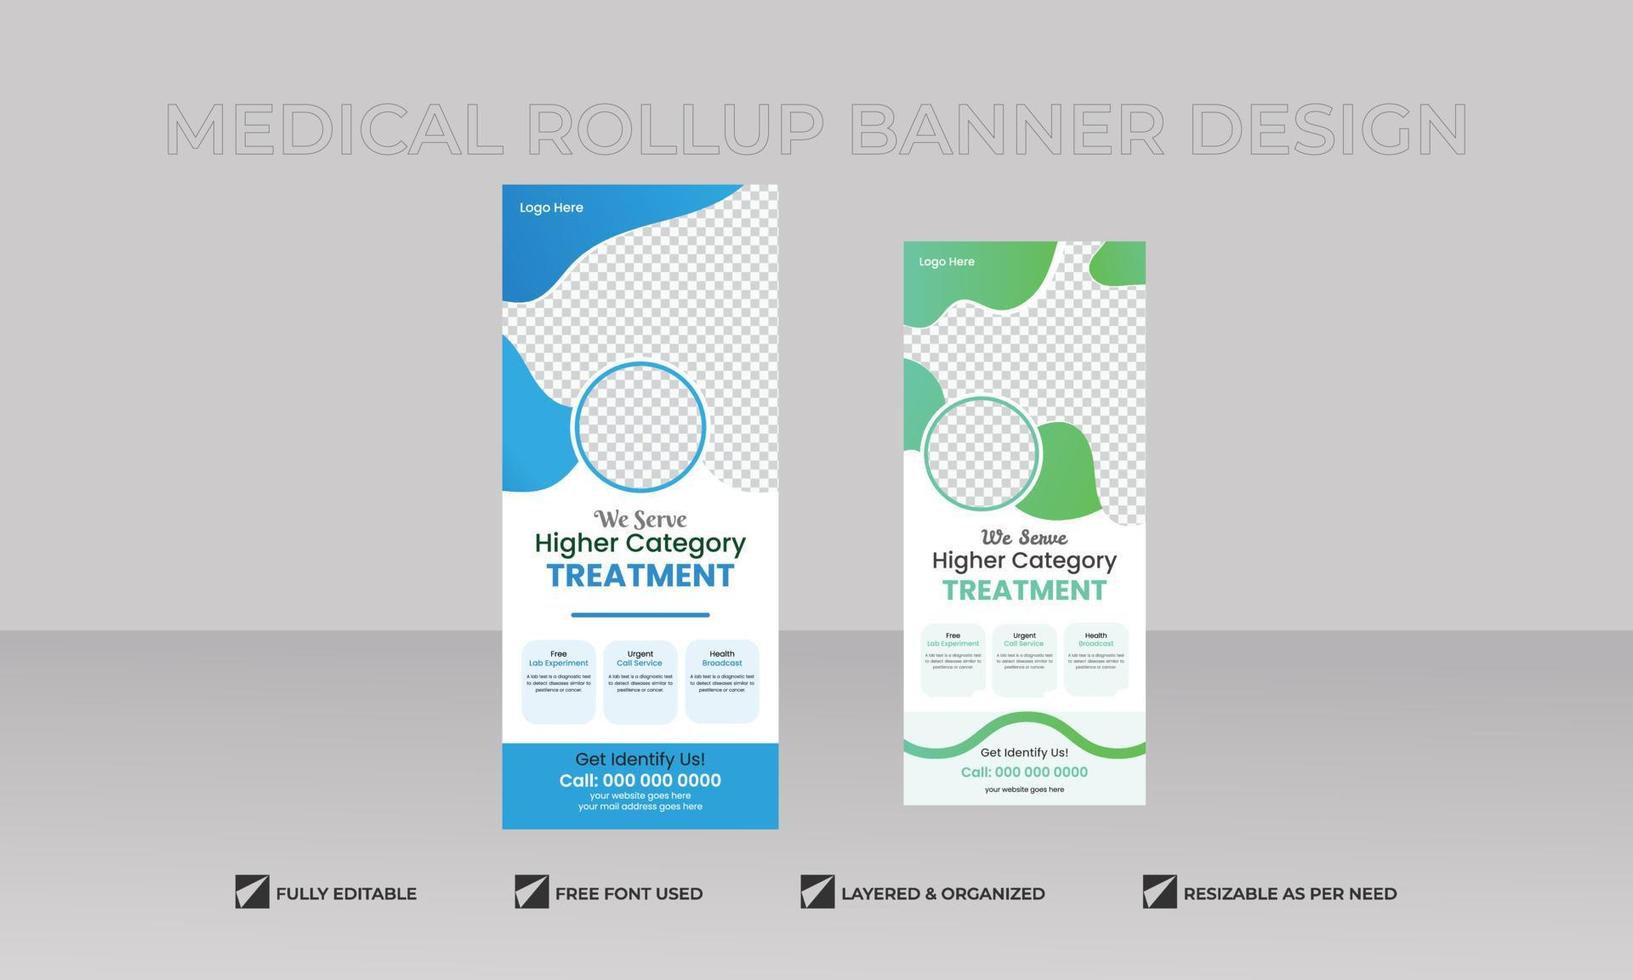 Medical rollup or X banner design template healthcare cover professional banner design layout vector